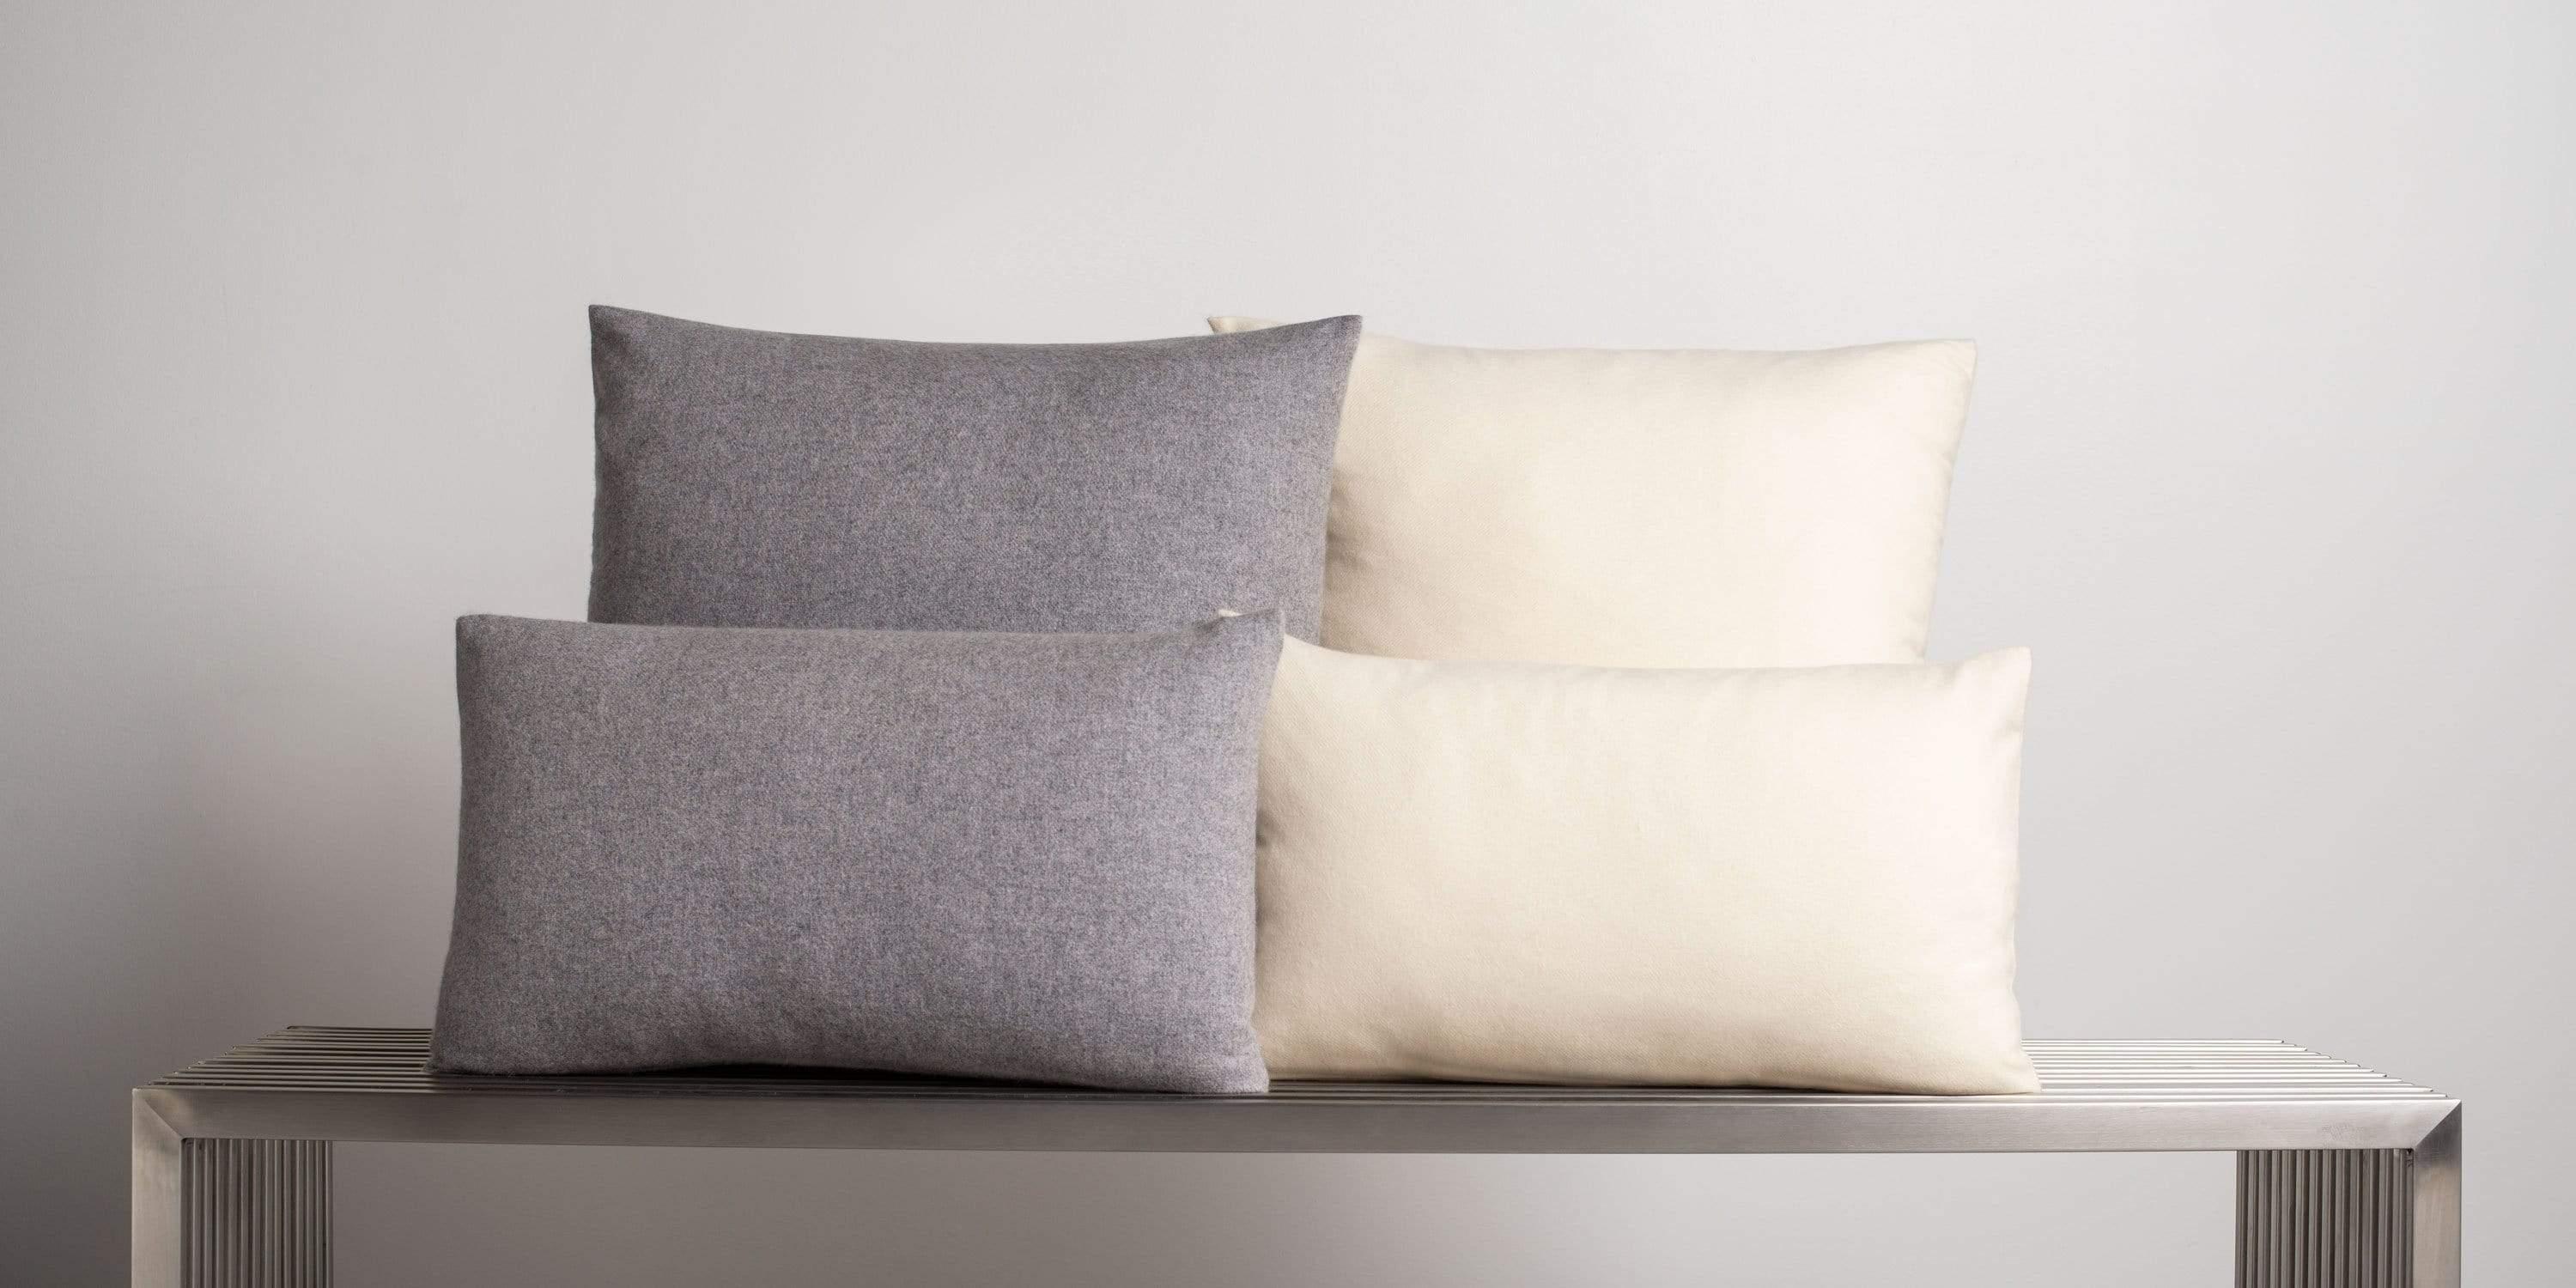 Our pure cashmere pillows are the perfect blend of beauty and function, the luxe softness of cashmere paired with a soothing neutral palette elevate any space. Pillow insert sold separately.

Size 22